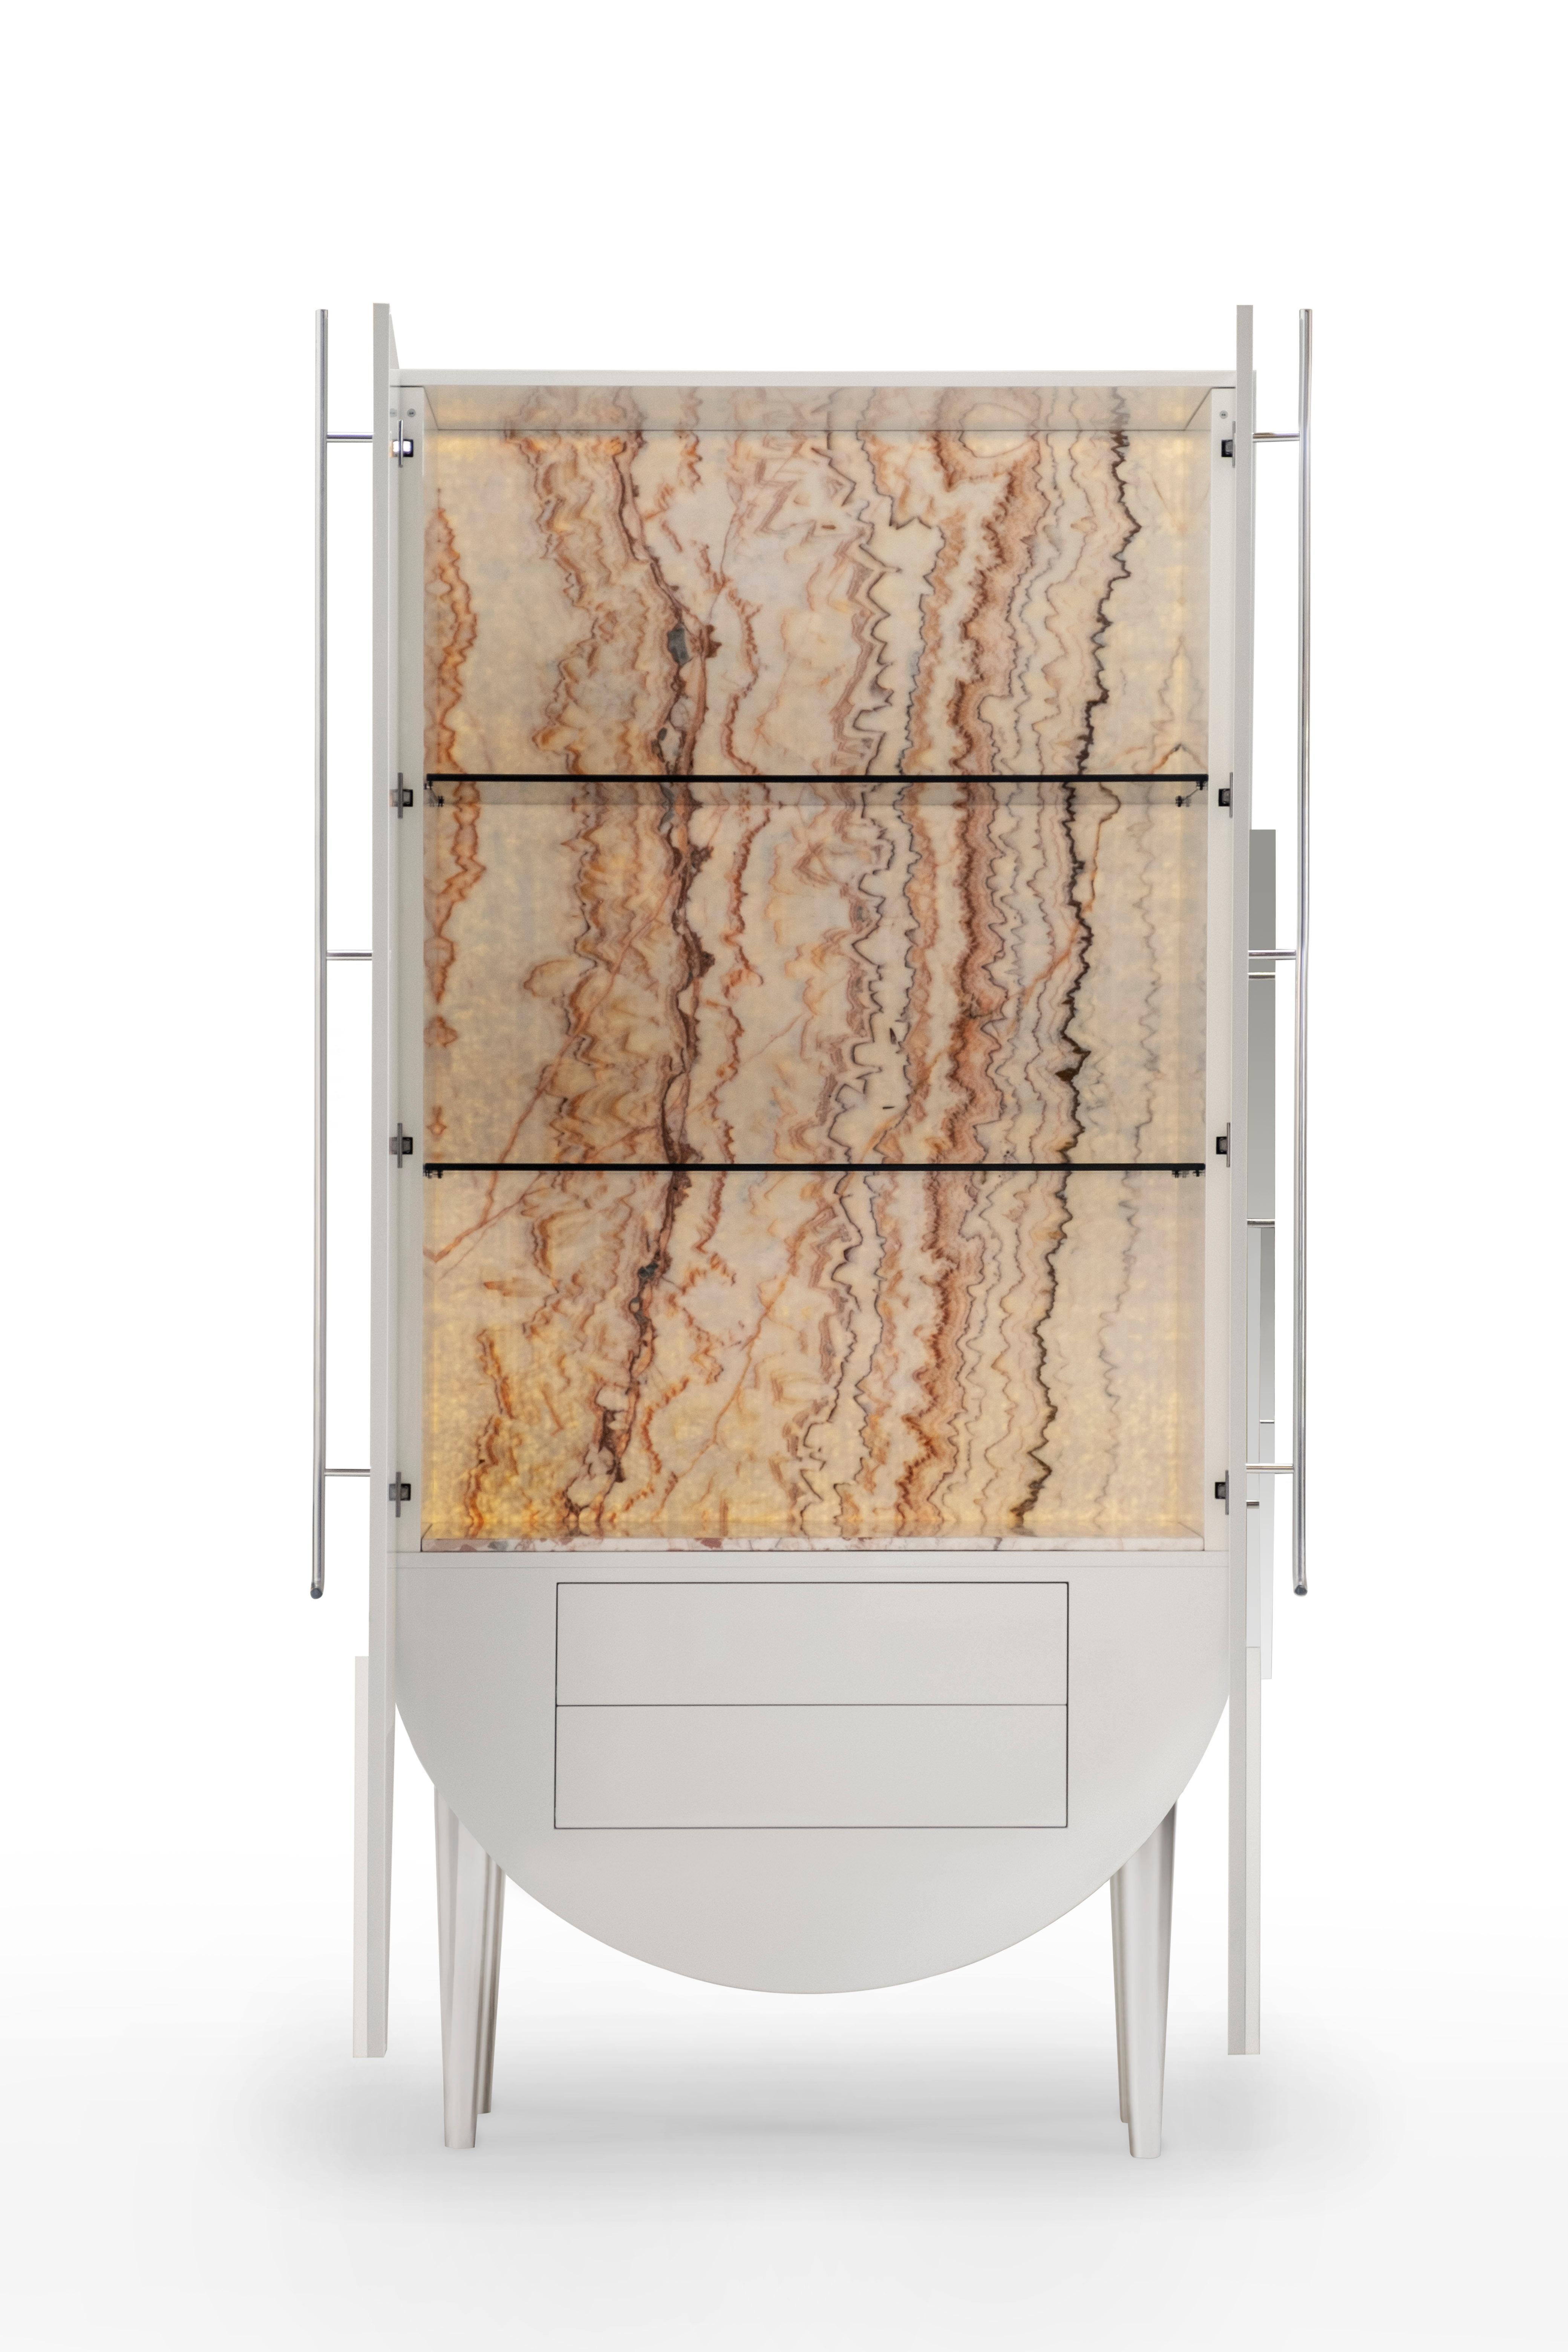 Saqris bar cabinet, Contemporary Collection, handcrafted in Portugal - Europe by Greenapple.

Designed by Rute Martins for the Contemporary Collection, the Saqris bar cabinet draws inspiration from the southernmost region of Portugal with subtle